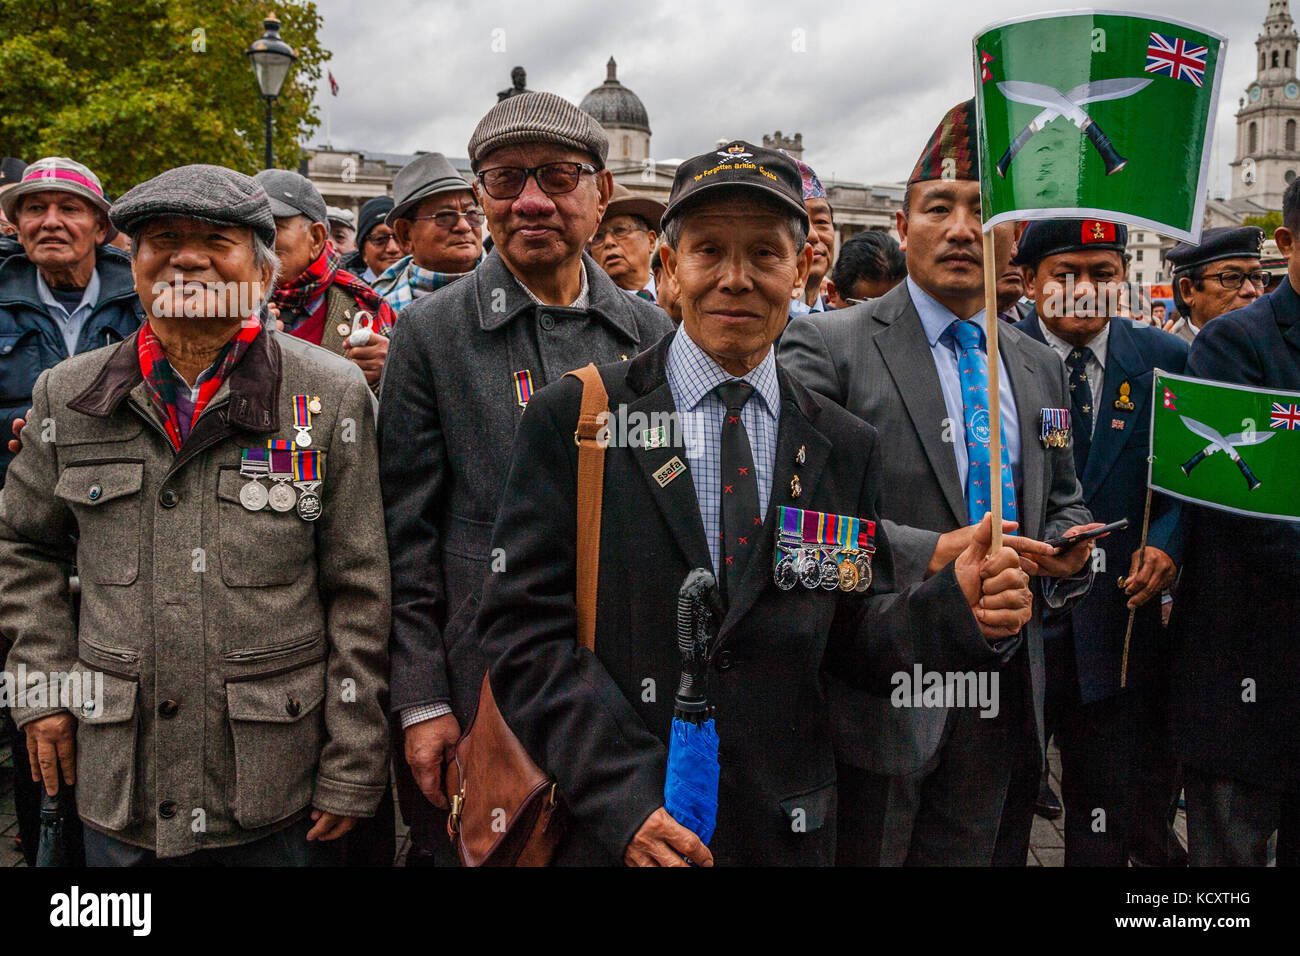 London, UK. 7th October 2017. Ghurkas join football fans from across the Uk marching against extremism under the banner of the FLA (football lads alliance) Credit: Grant Rooney/Alamy Live News Stock Photo